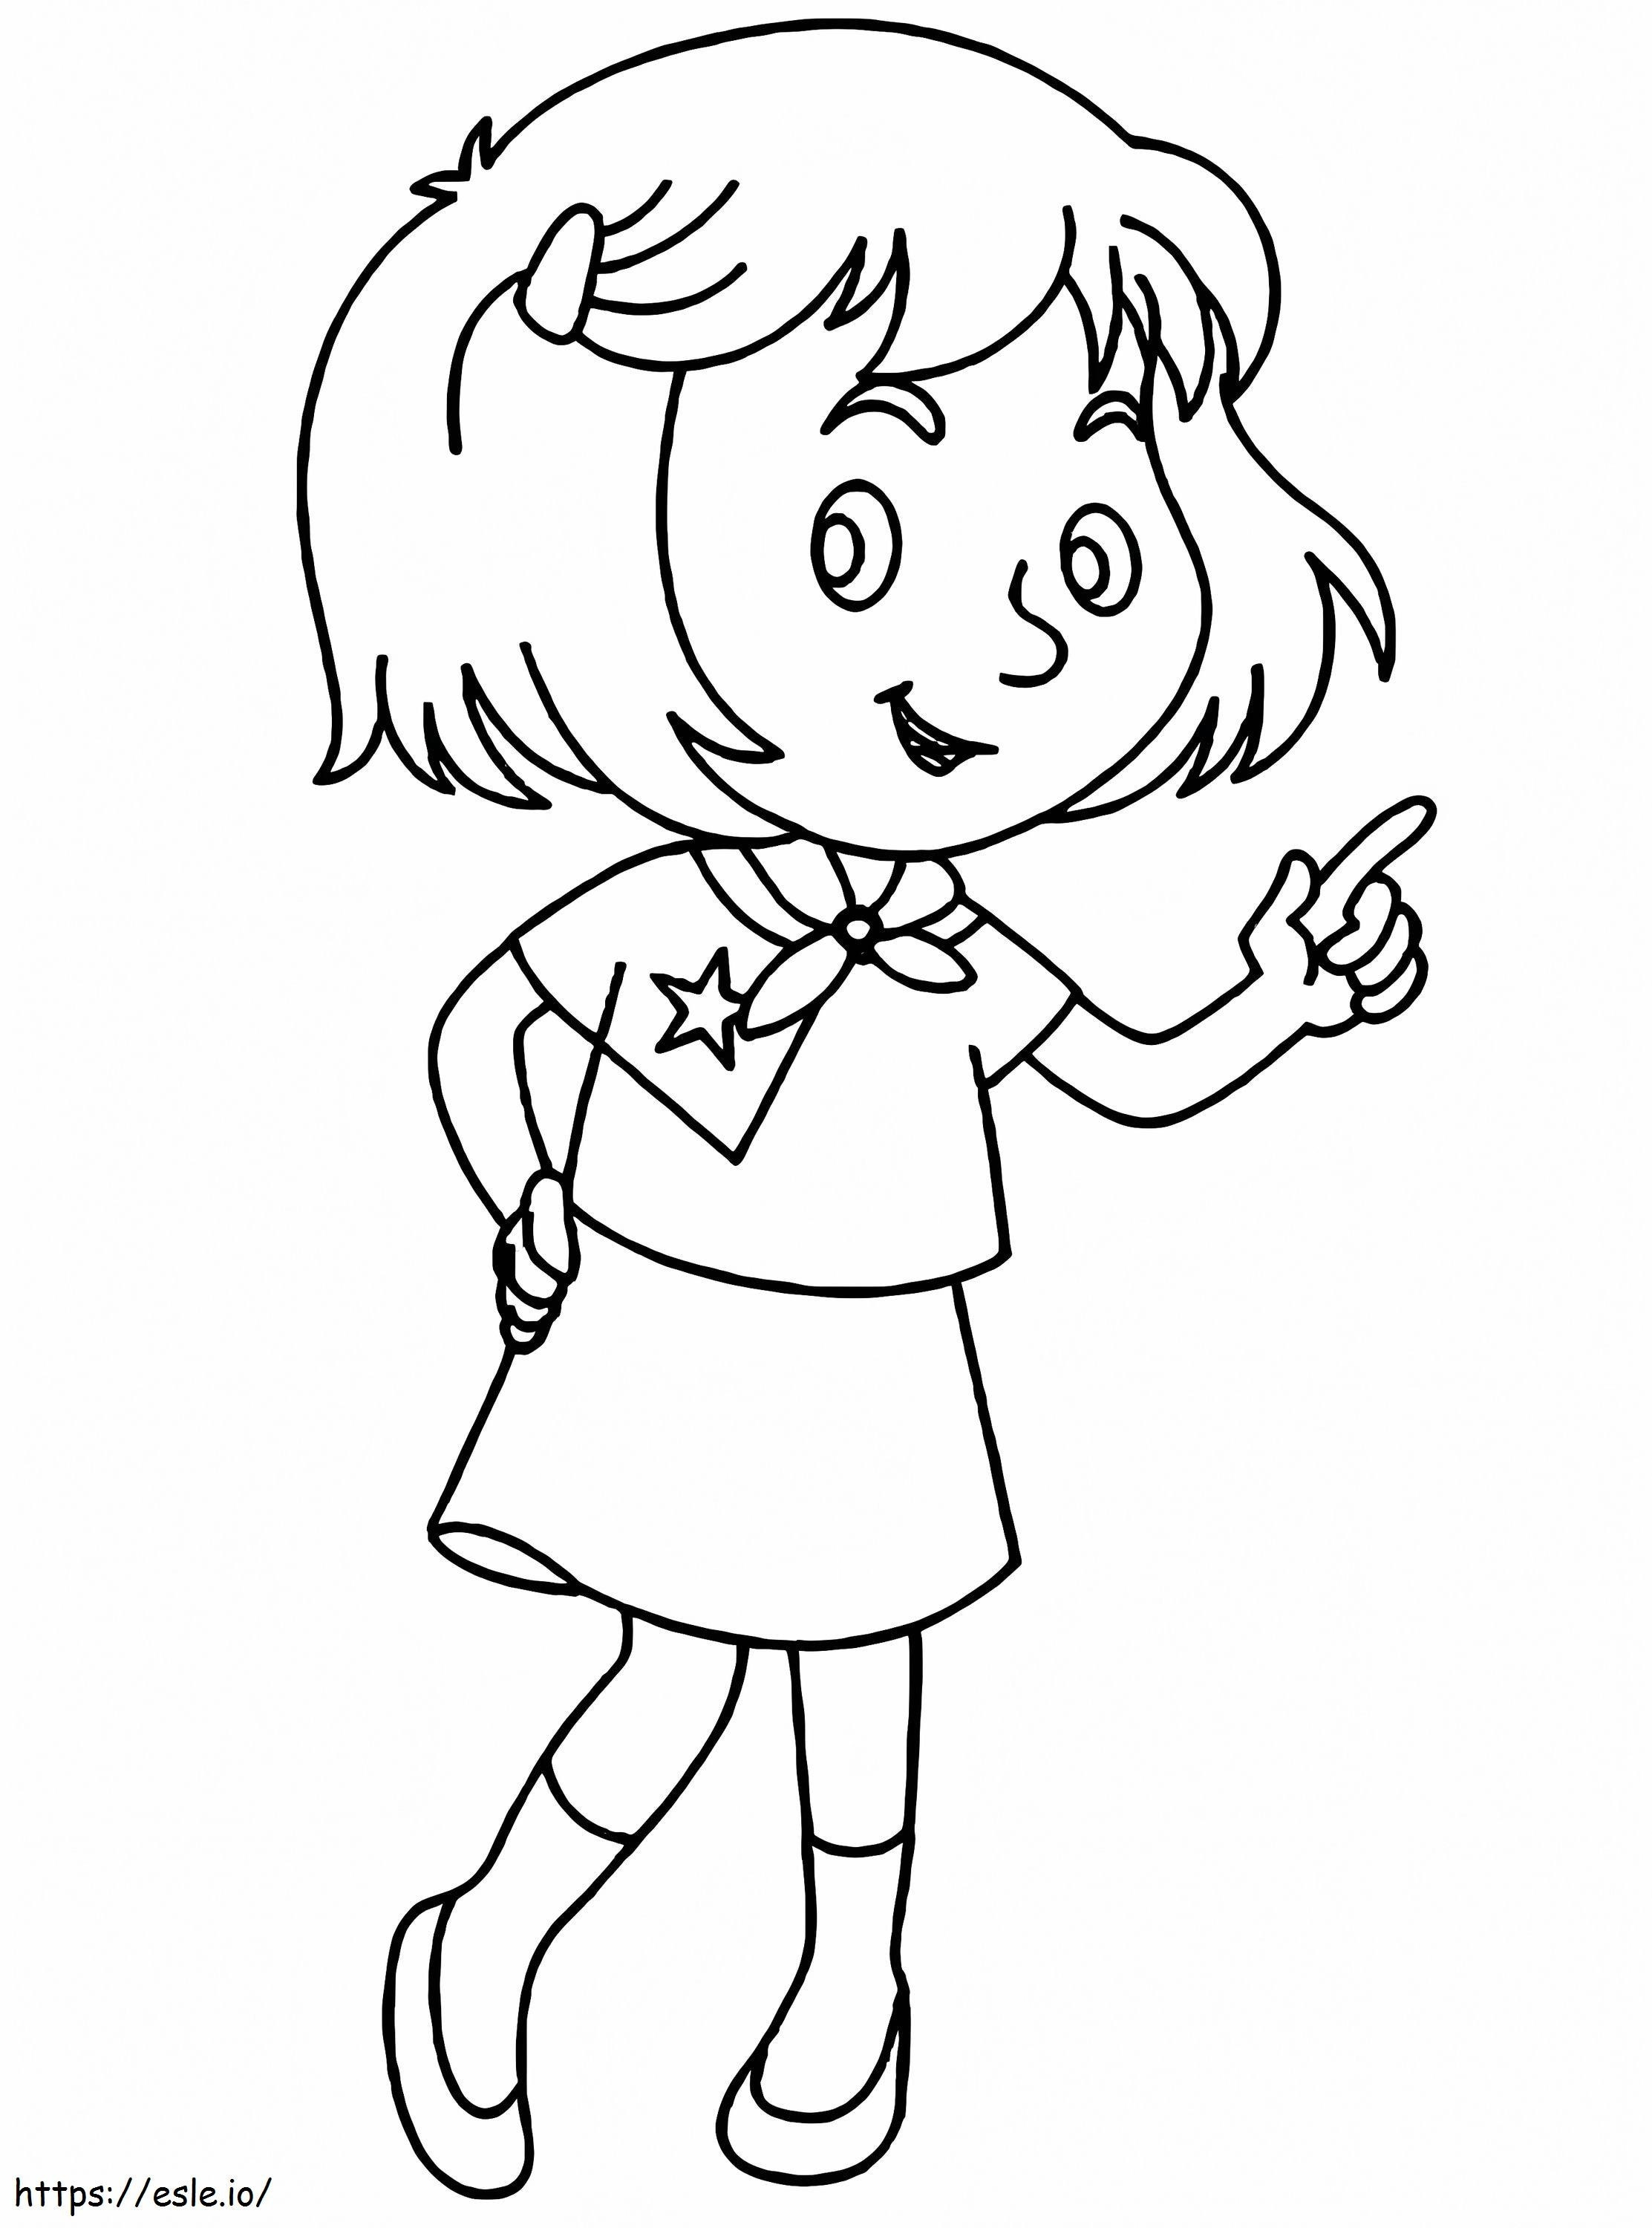 Chilean Girl coloring page